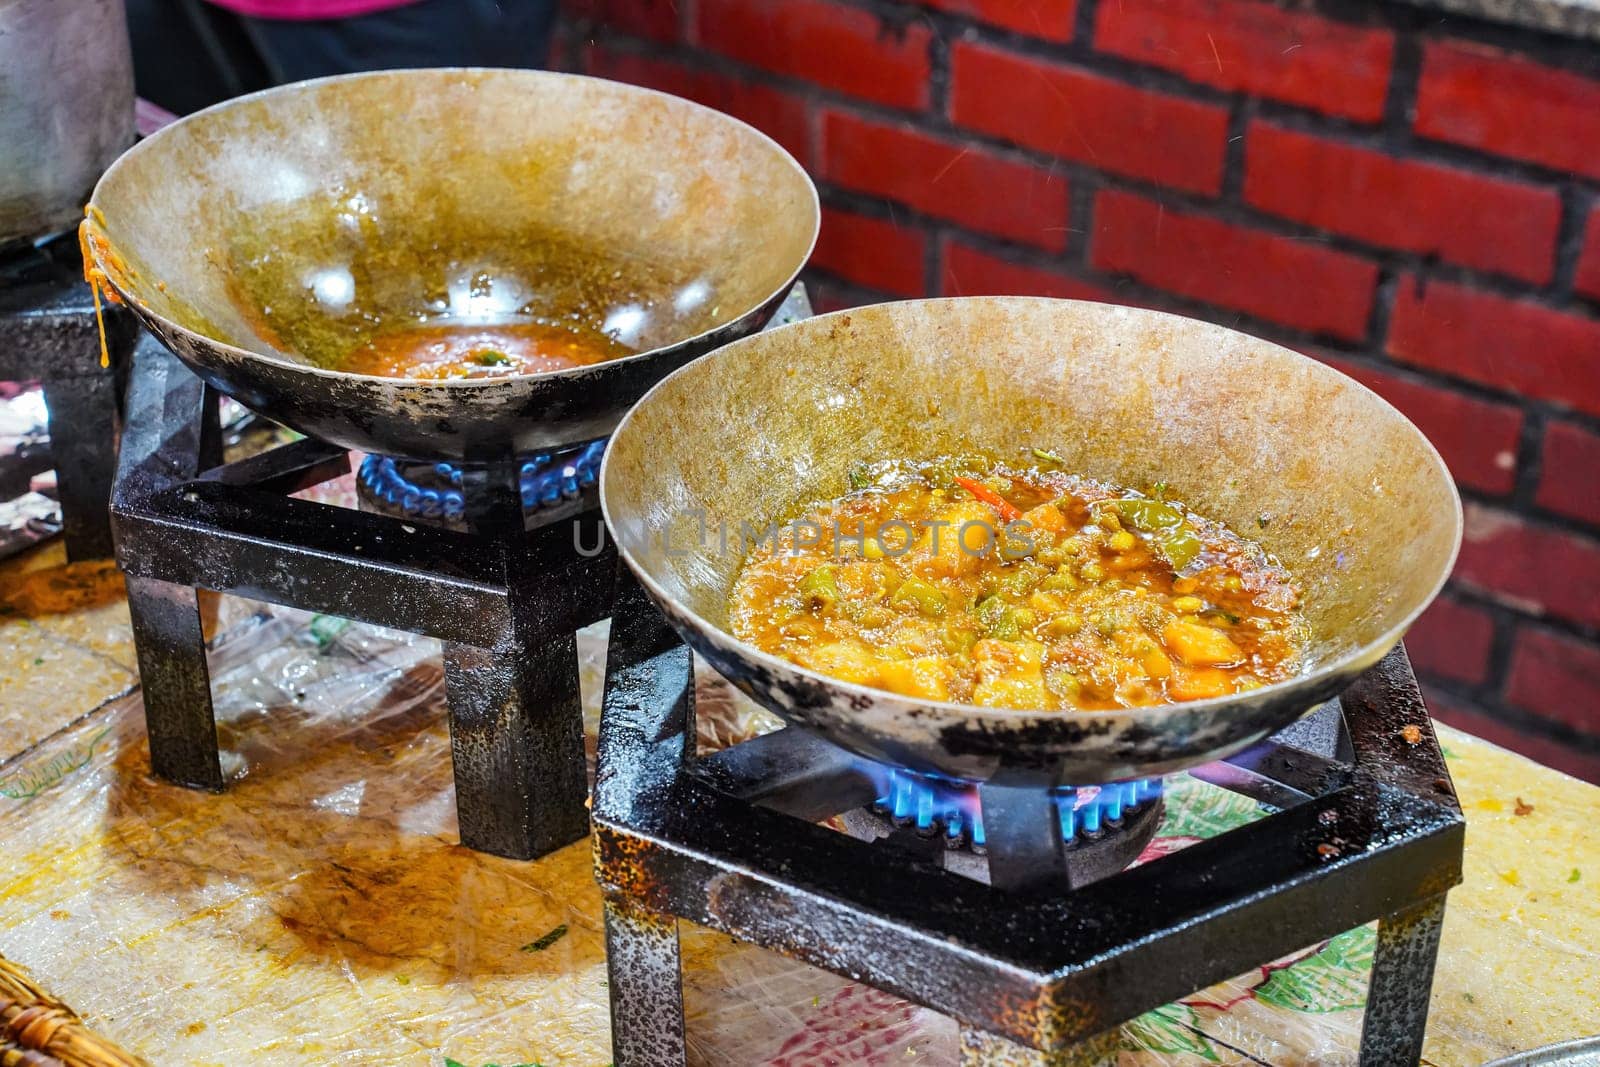 Food being prepared on simple gas stoves in typical Pakistani restaurant, herbs and spices dropped into steel pan with hot dish, closeup detail.